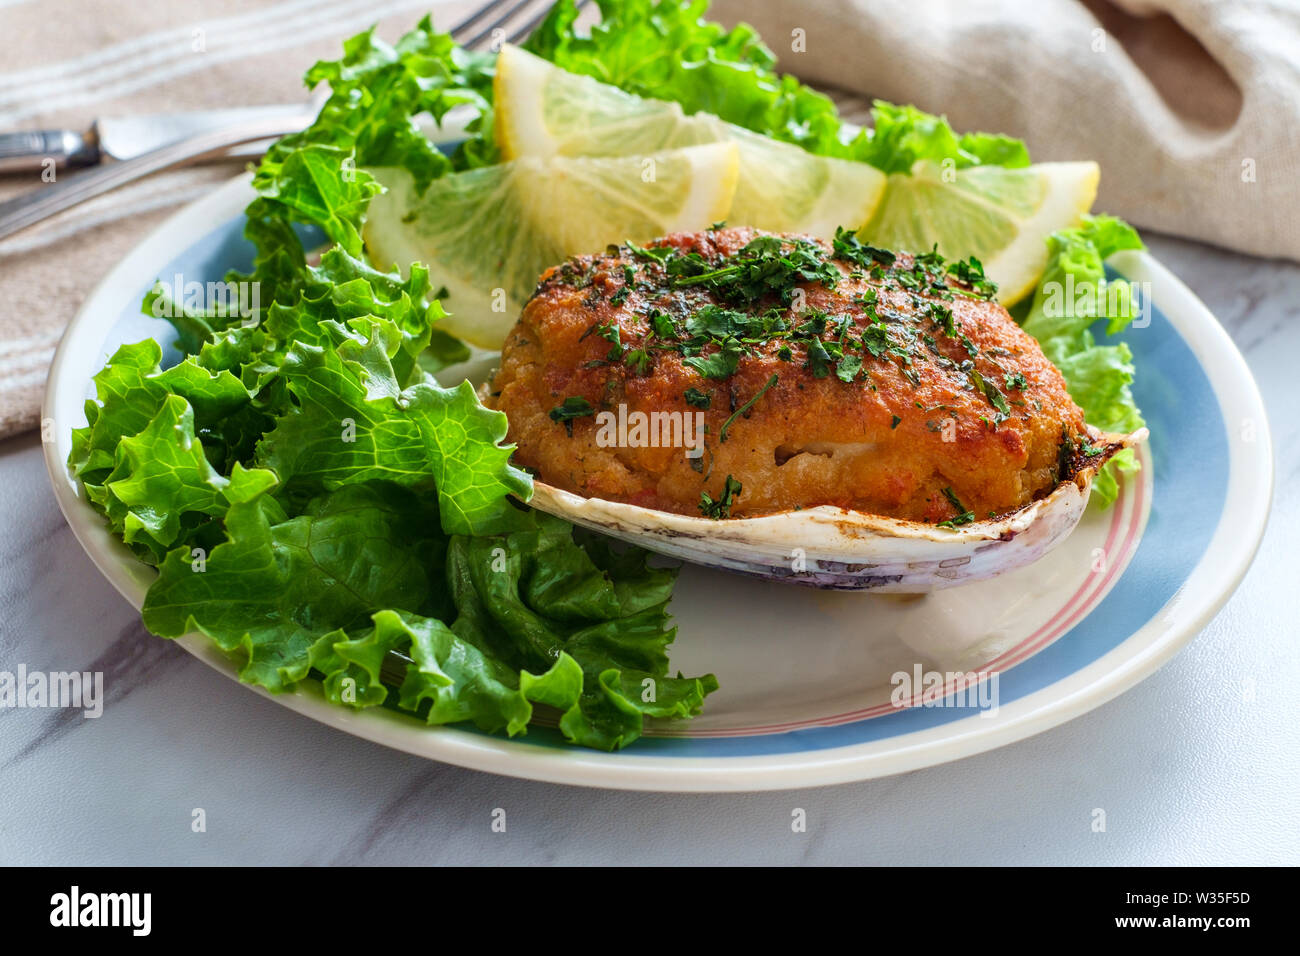 Stuffed seasoned clams garnished with romaine lettuce and lemon wedges on a marble kitchen table Stock Photo